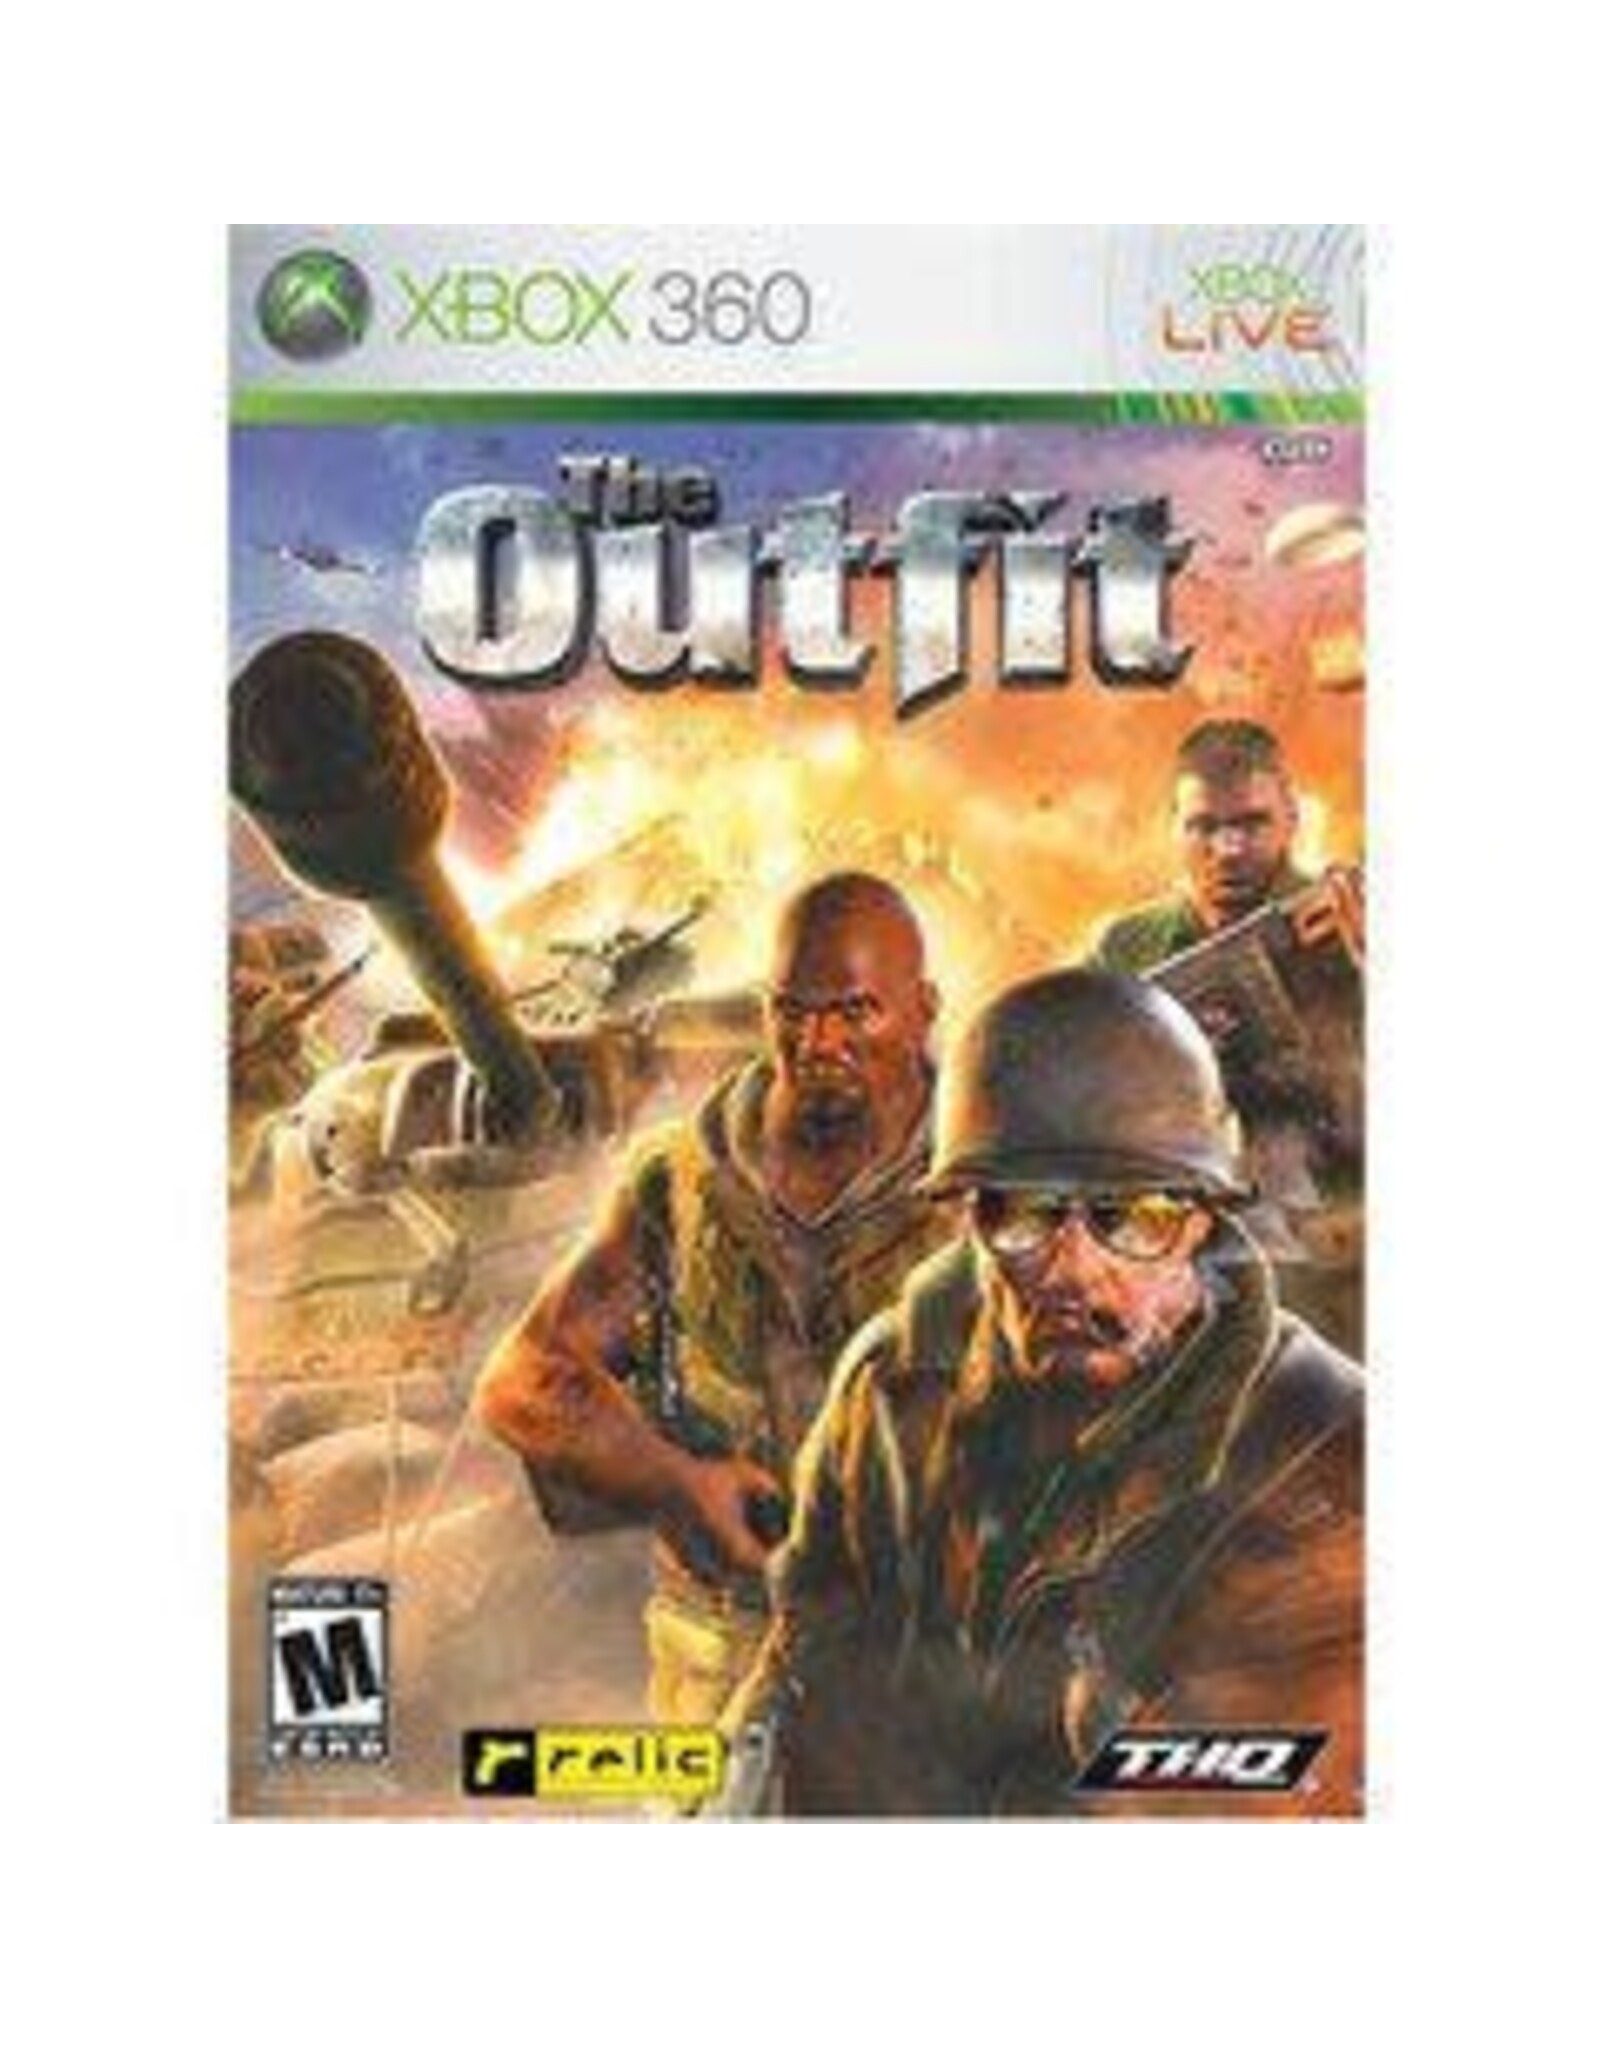 Xbox 360 Outfit, The (Used)